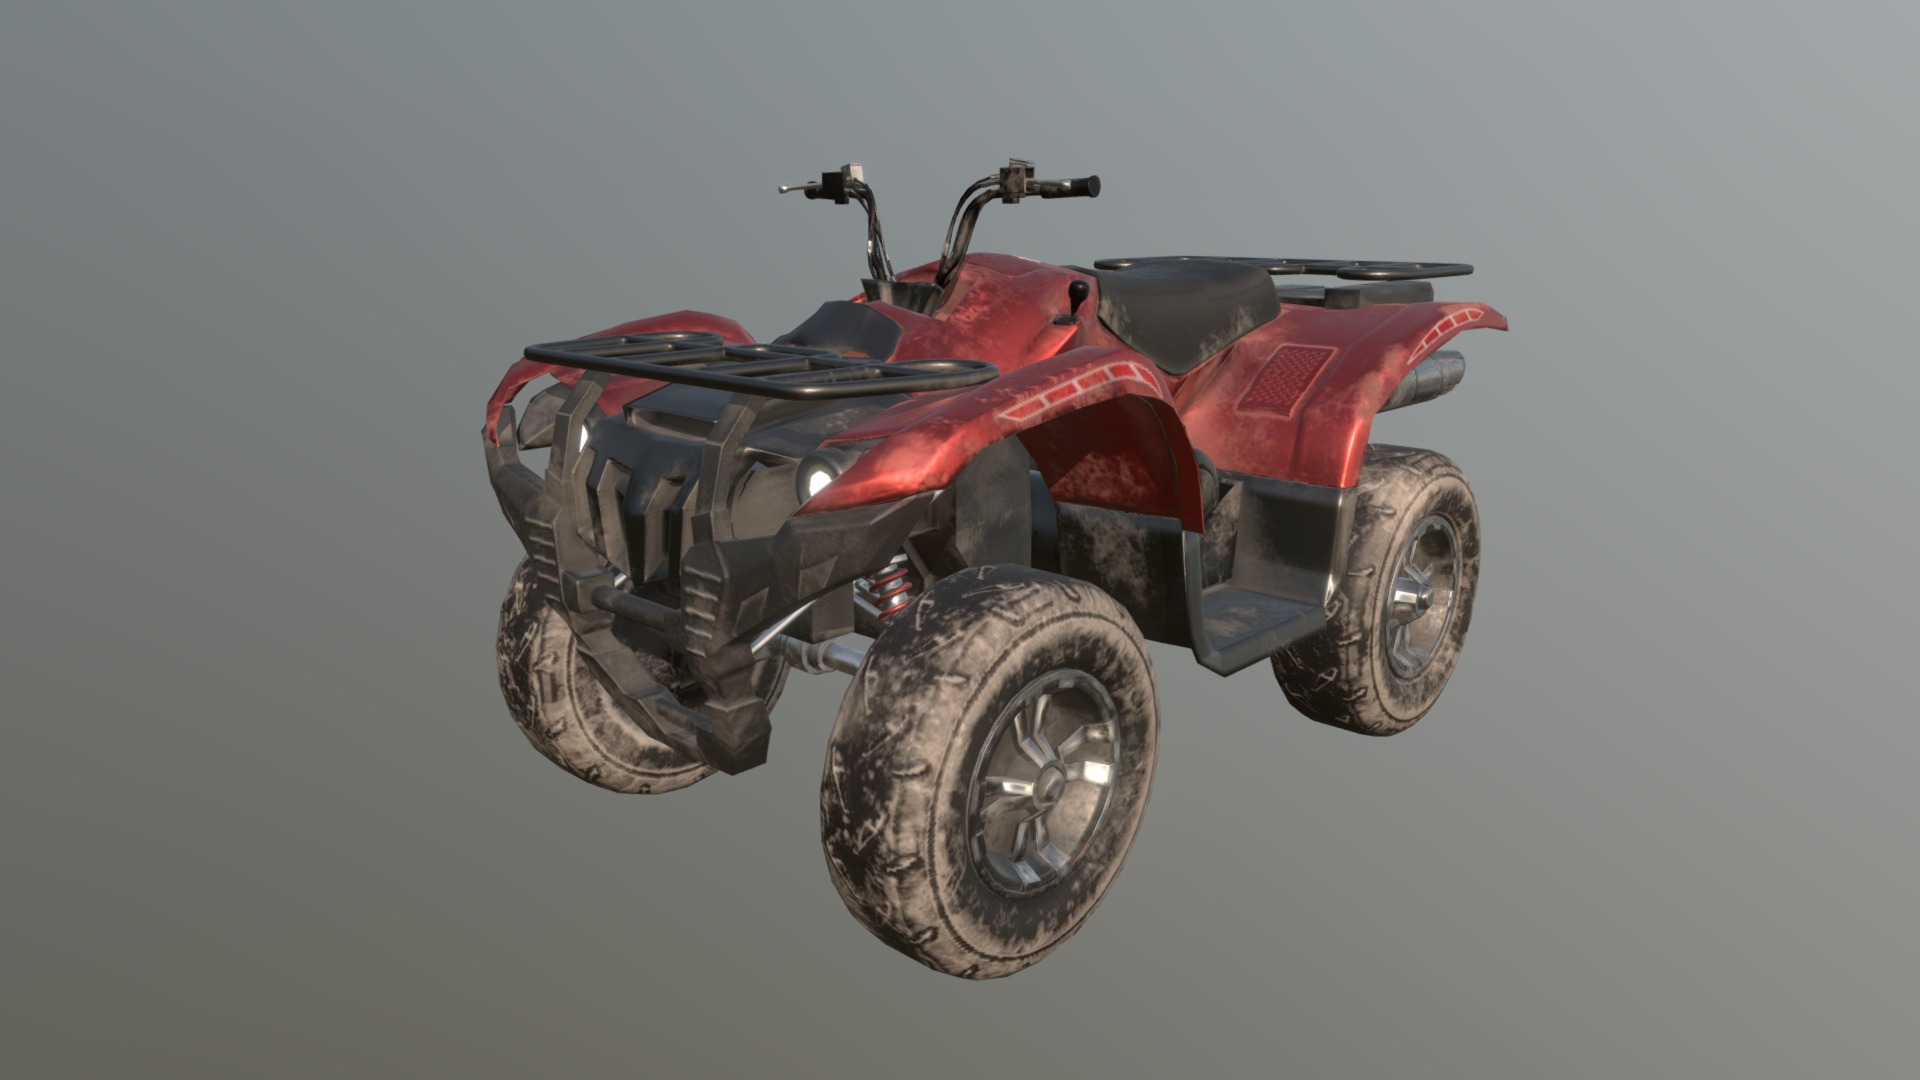 3D model Yamaha Grizzly 700 - This is a 3D model of the Yamaha Grizzly 700. The 3D model is about a red vehicle with wheels.